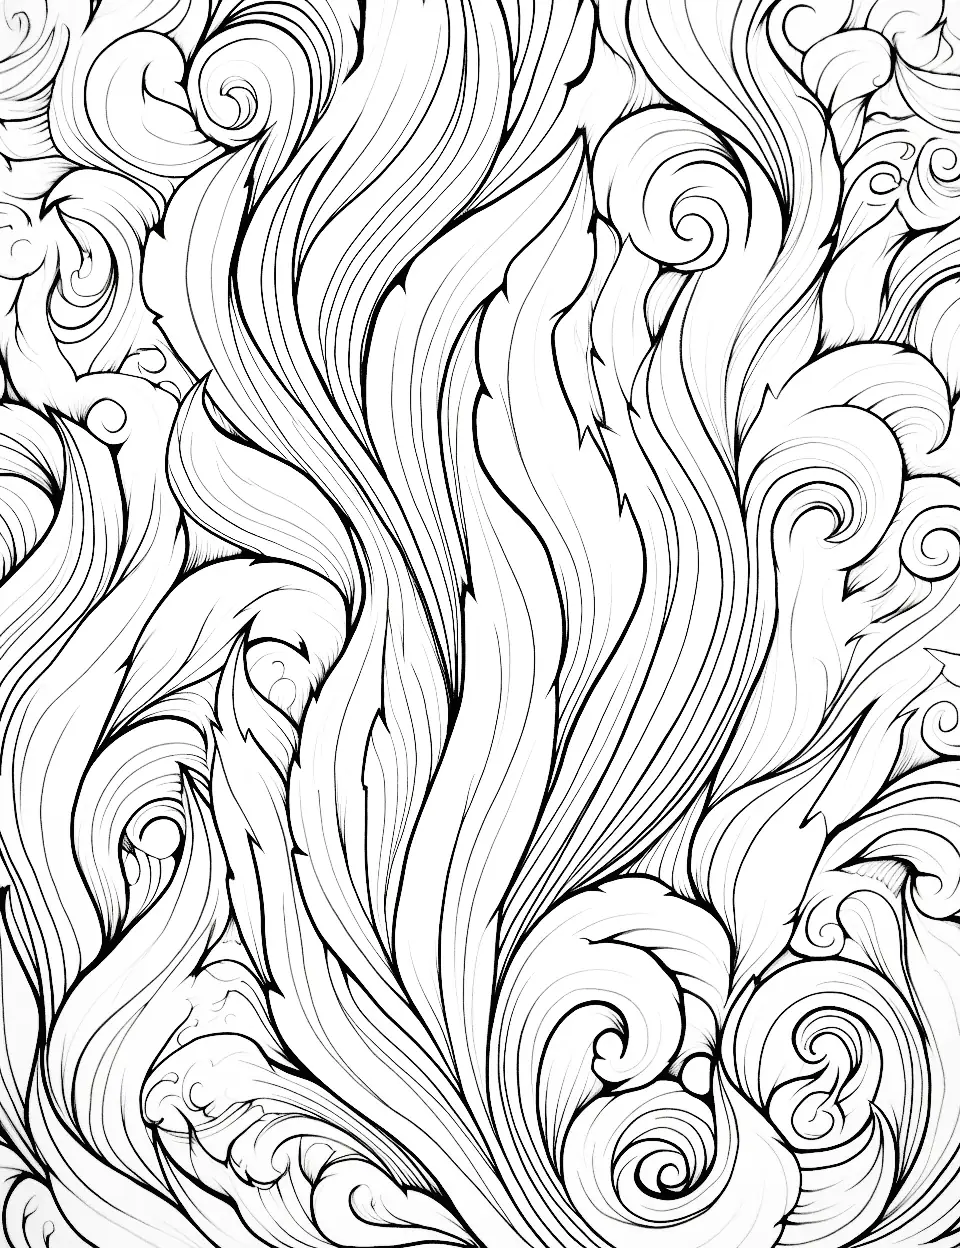 Dancing Flames Adult Coloring Page - Flames dancing with intricate patterns.